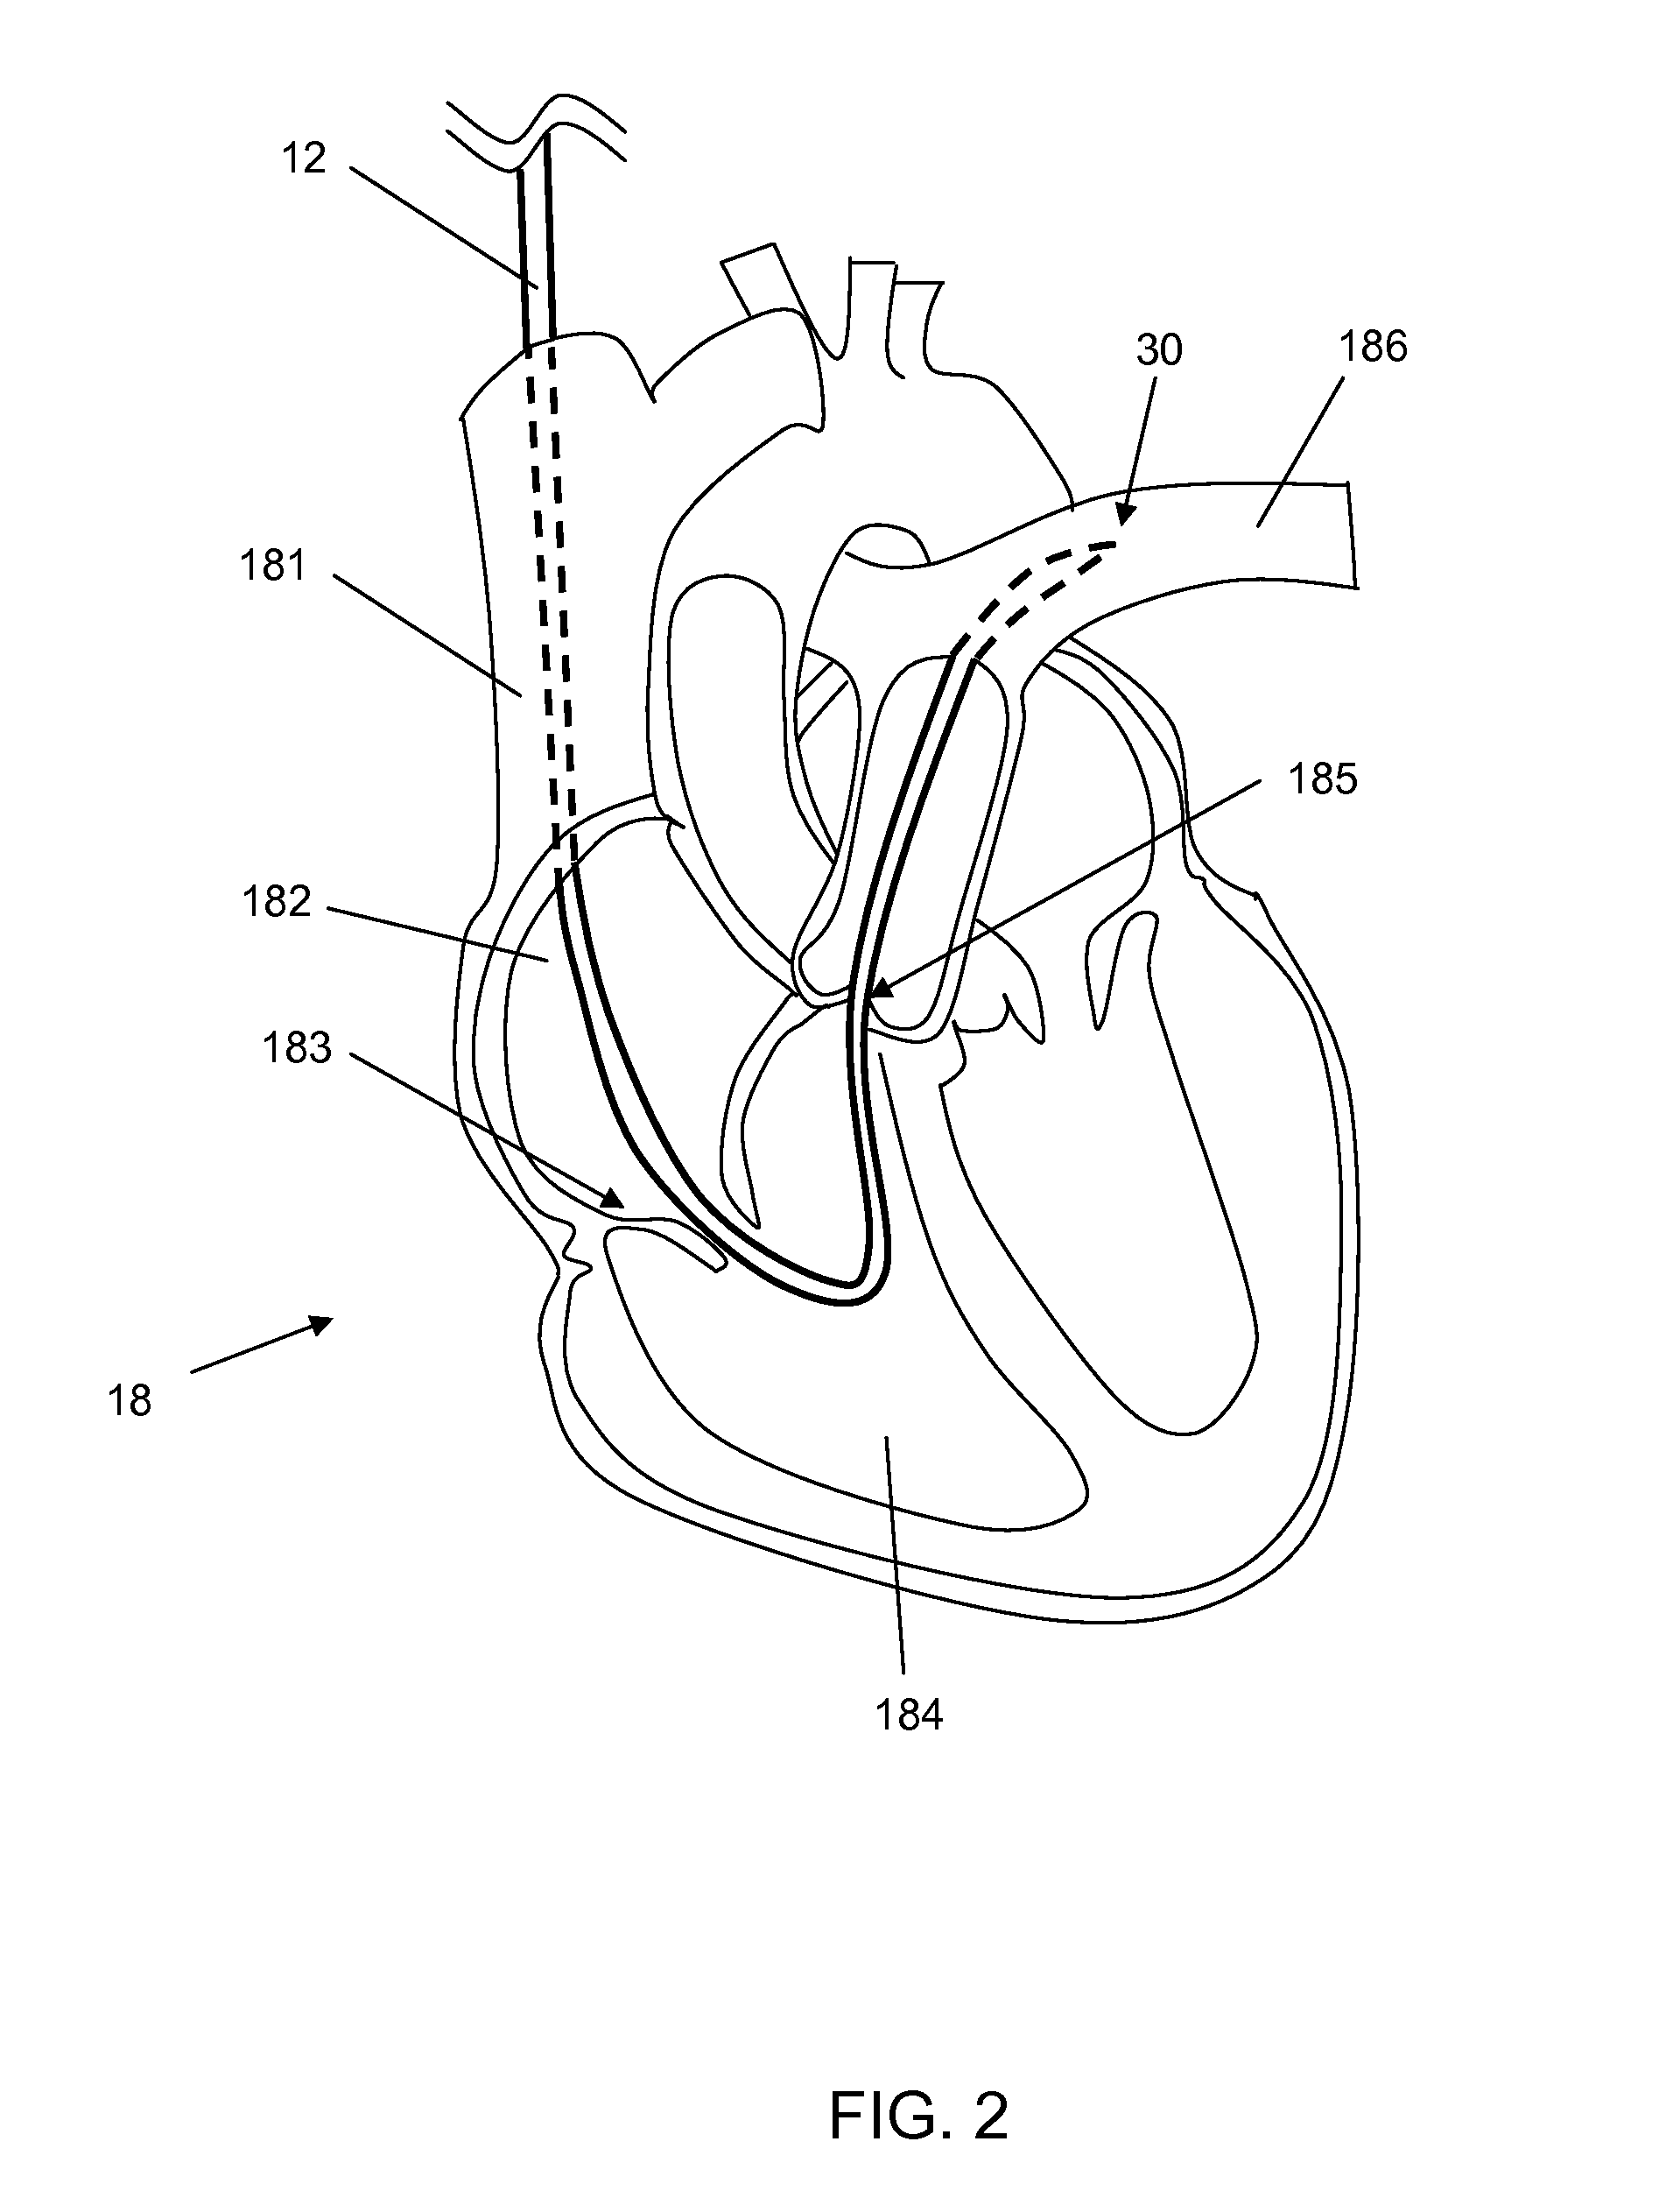 Pressure monitoring to control delivery of therapeutic agent